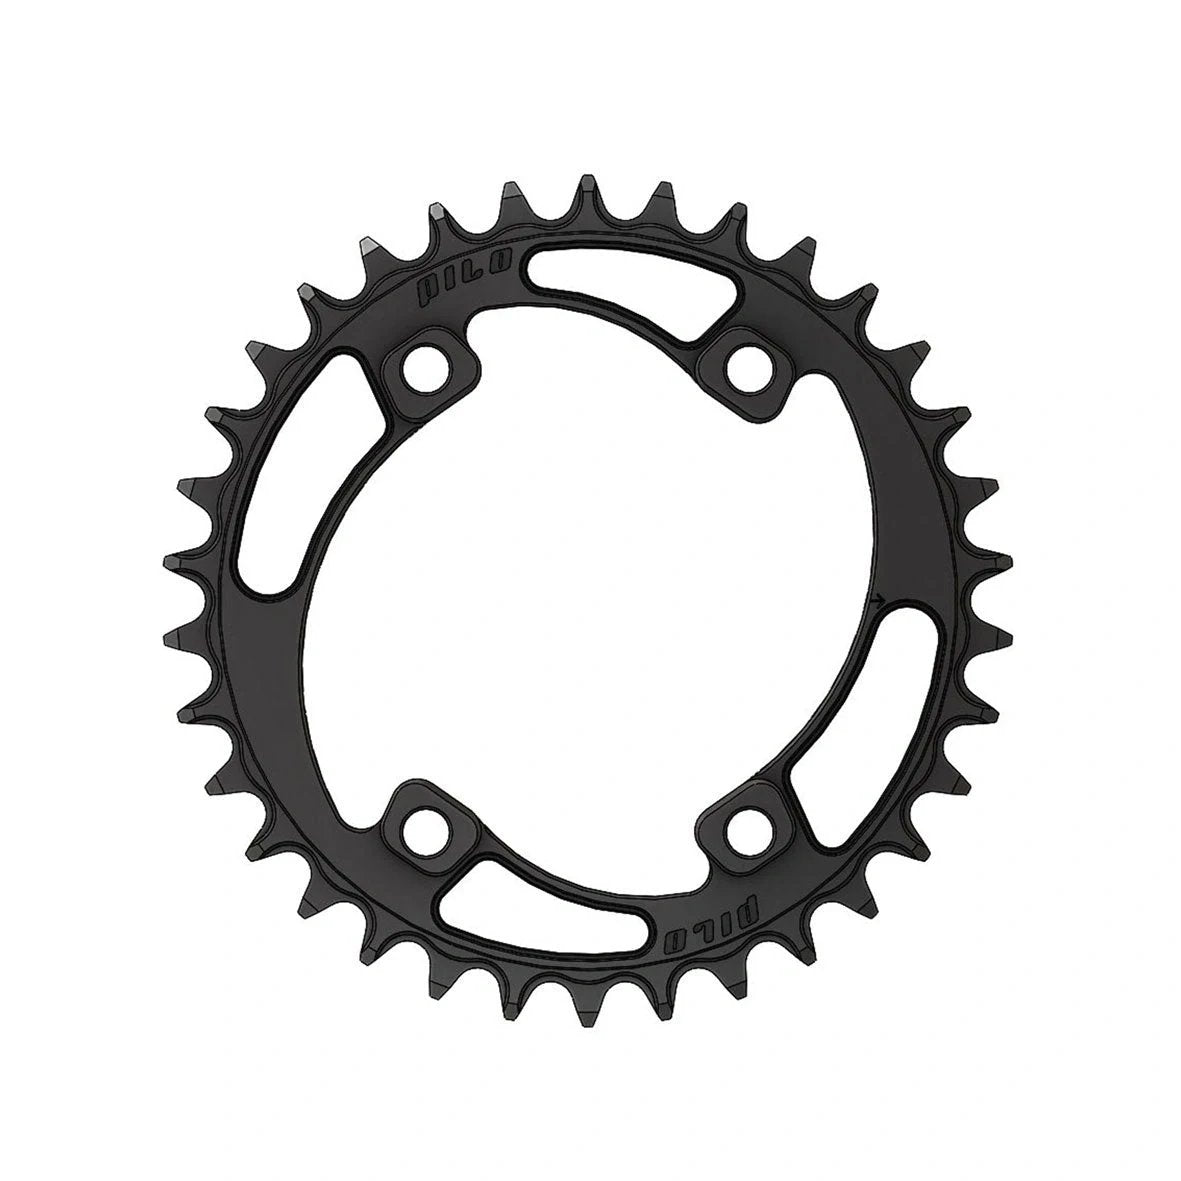 Pilo 34T 96Bcd Chainring For Cranks - Replacement Chain Ring